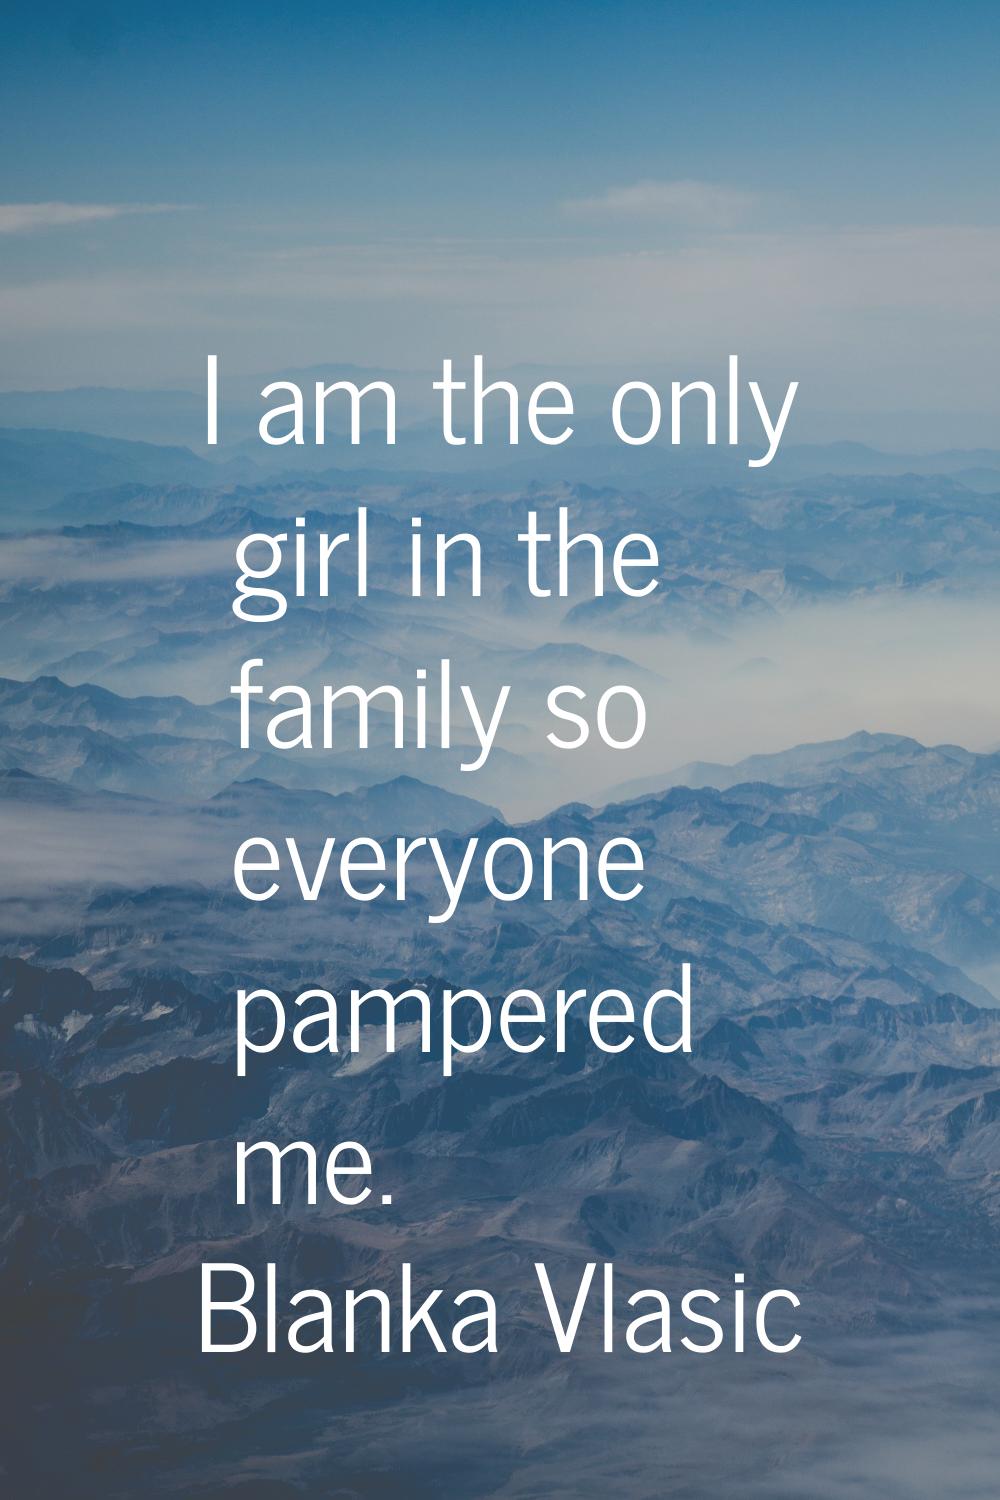 I am the only girl in the family so everyone pampered me.